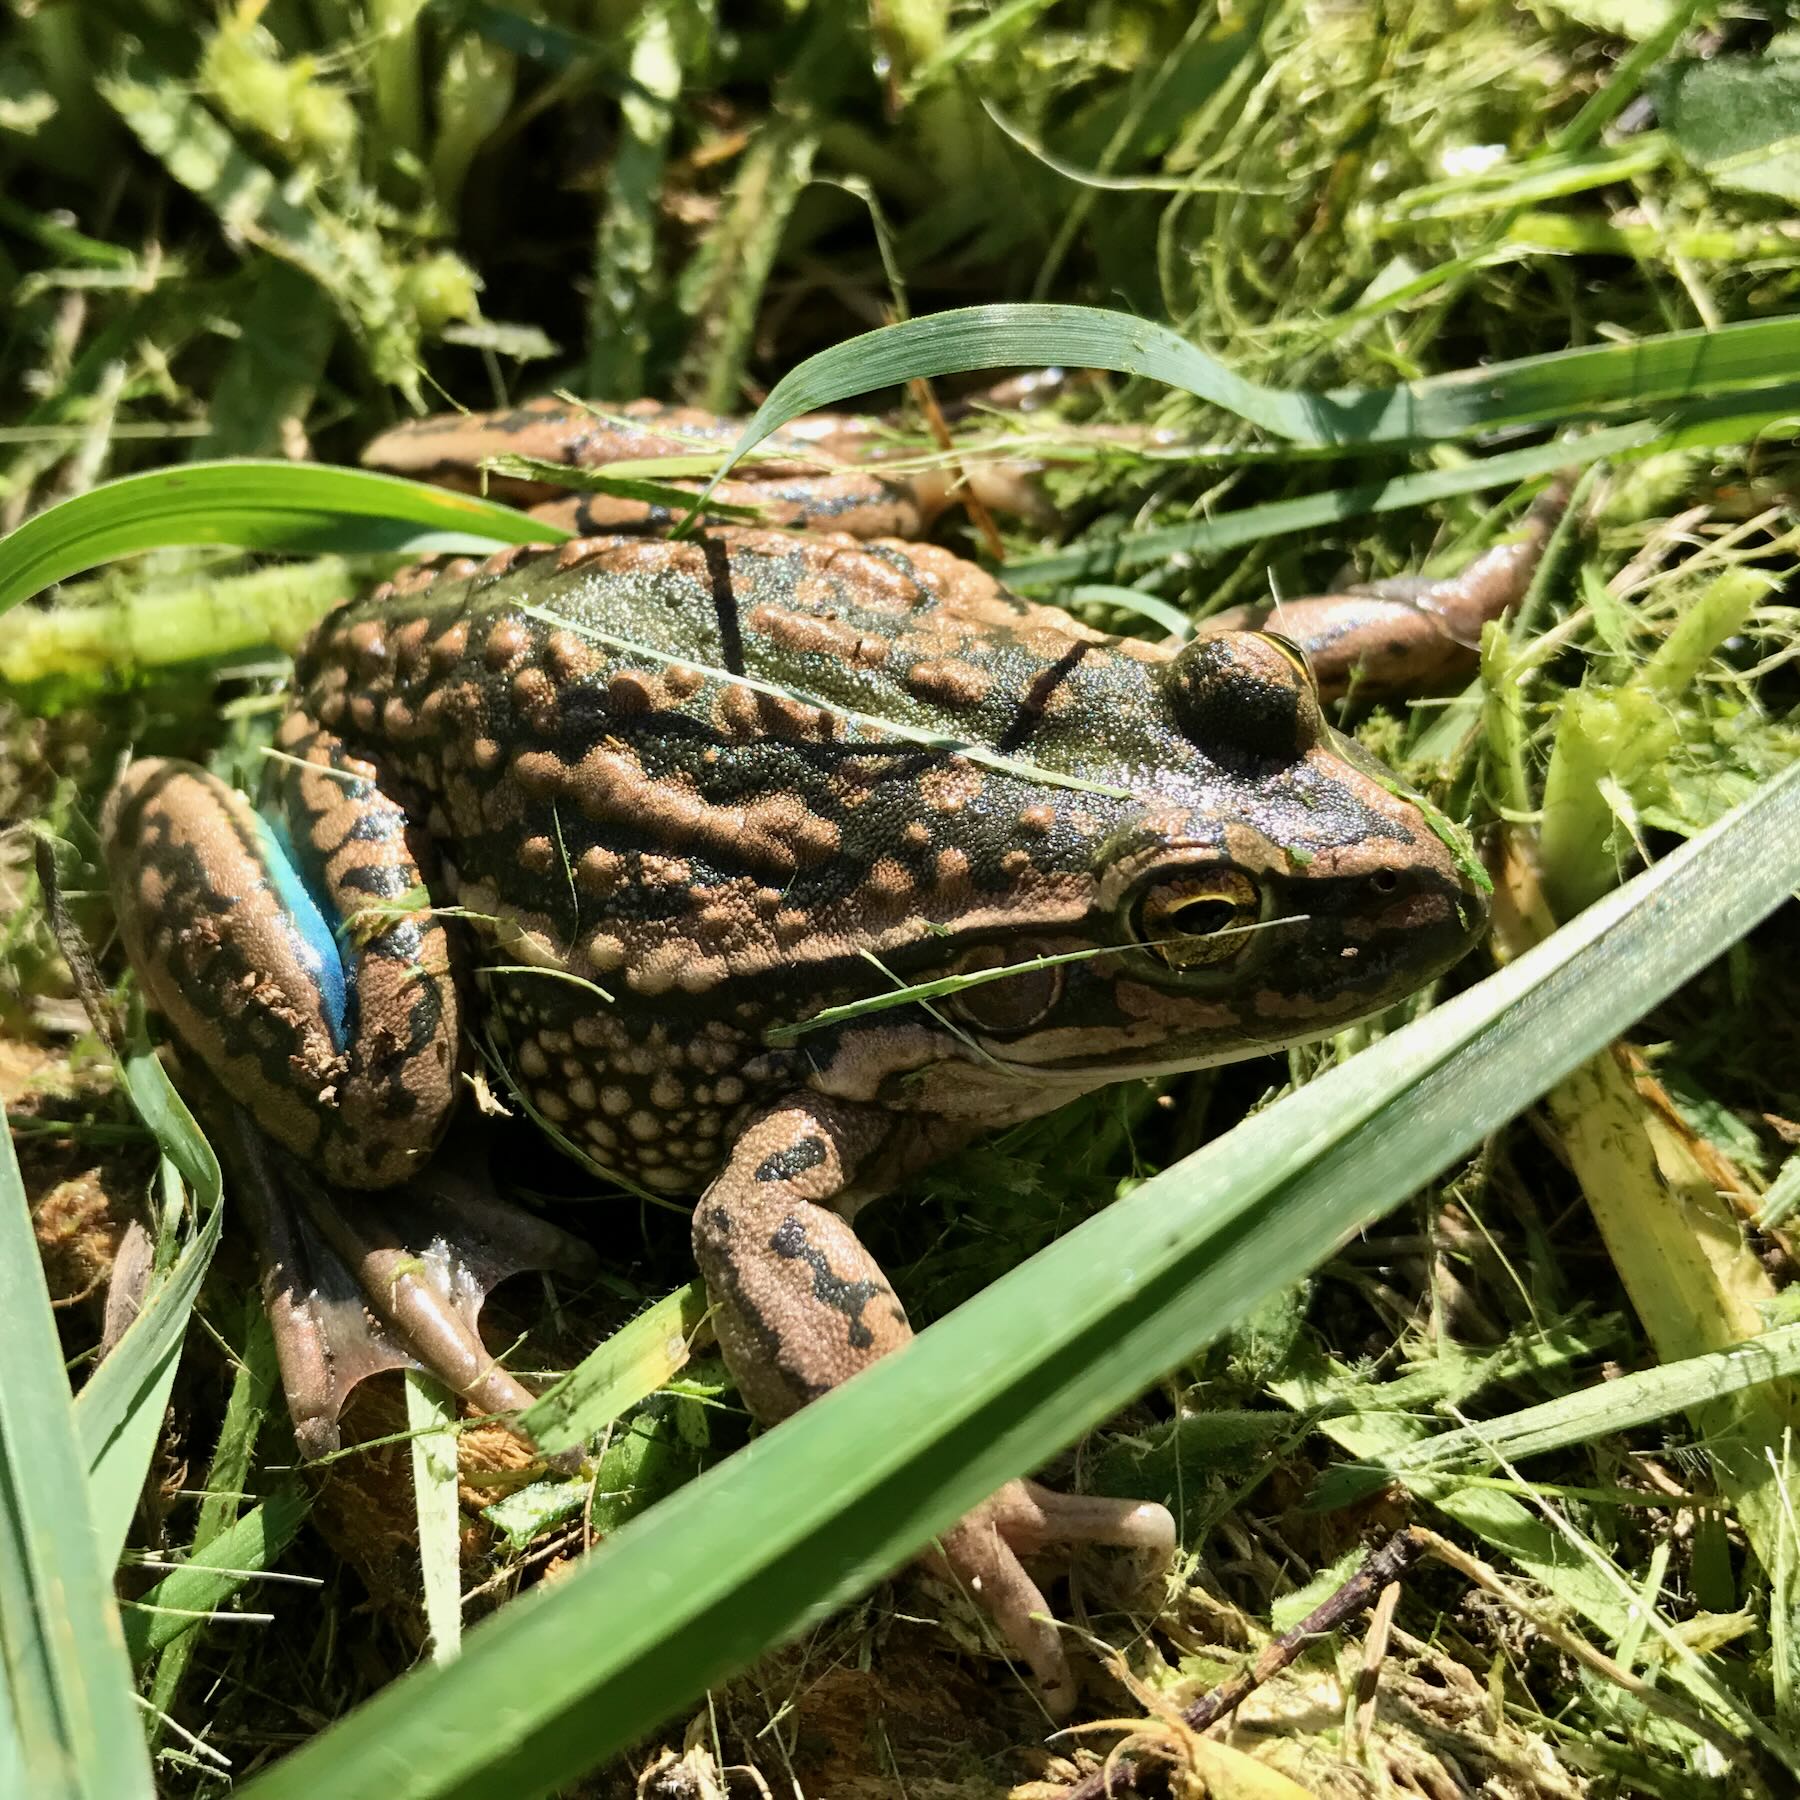 Largely brown and dark green warty looking frog on grass.